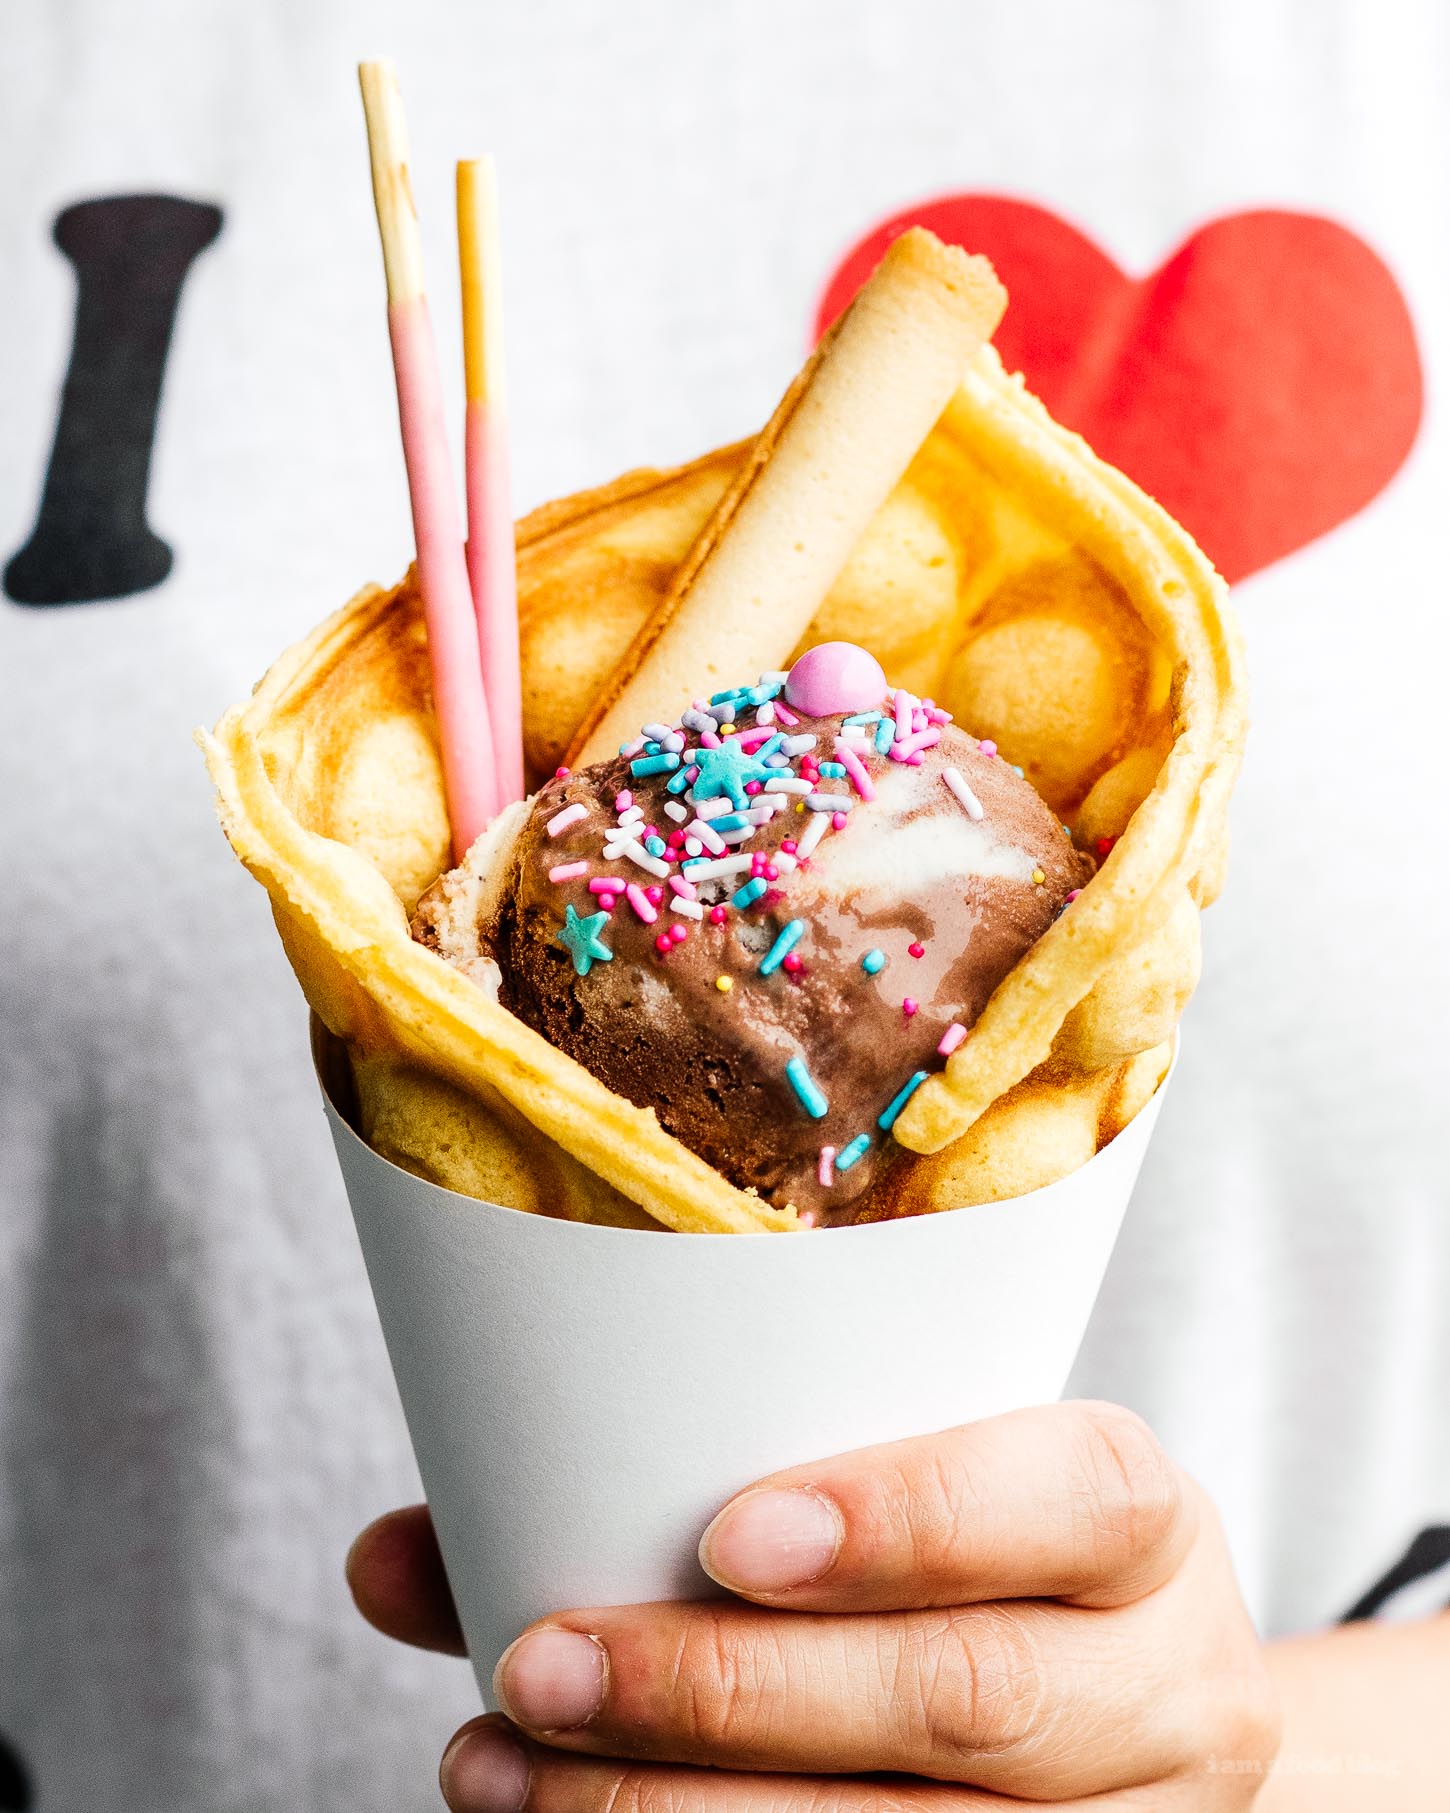 Make your own infinitely instagram friendly bubble waffle ice cream cones/puffle cones/eggloo egg waffle cones right at home. The batter comes together easily and you can fill your cones with ALL the things: ice cream, fruit, cookies, anything goes. #bubblewaffle #bubblewafflecones #hongkongbubblewaffles #pufflecone #eggloo #eggwaffle #recipes #dessertrecipes